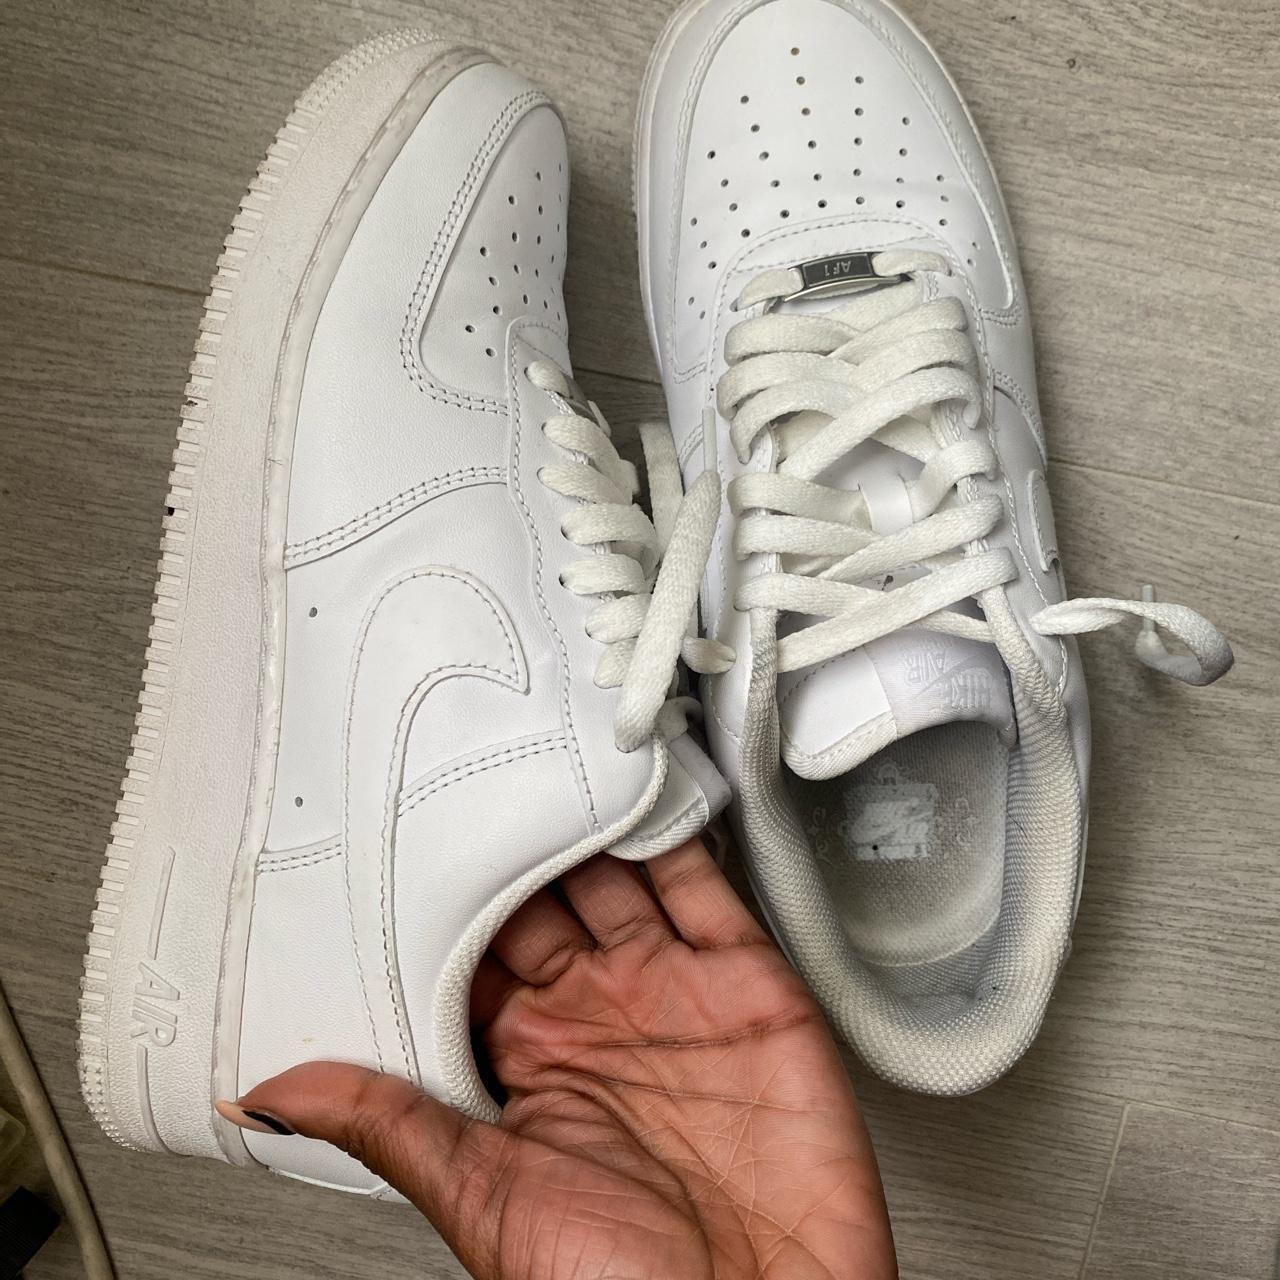 Nike Airforces / Air Force 1’s white size 7.5 - Depop